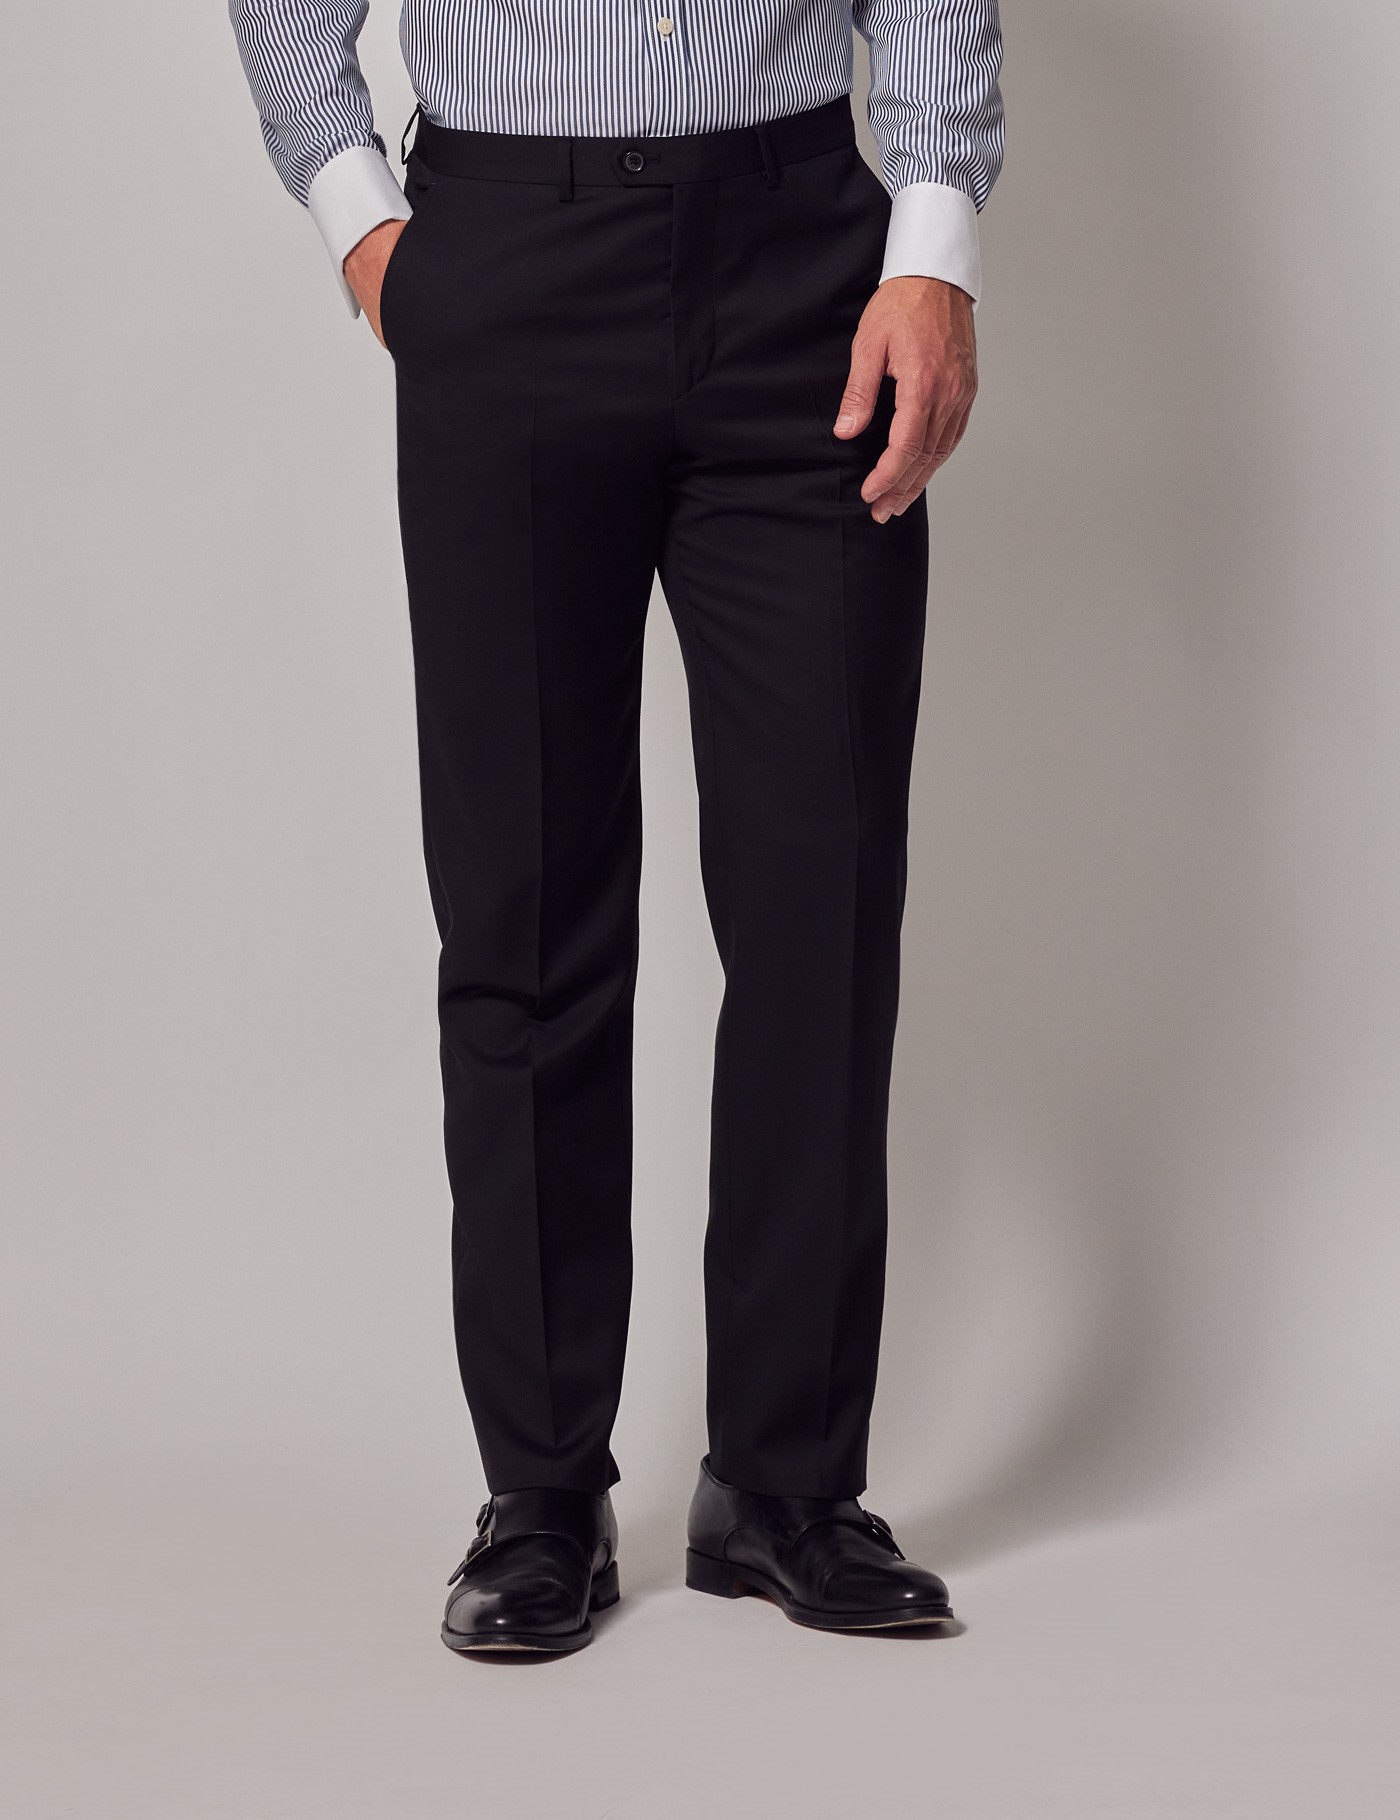 Men's Black Italian Wool Tailored Fit Suit Pants – 1913 Collection ...